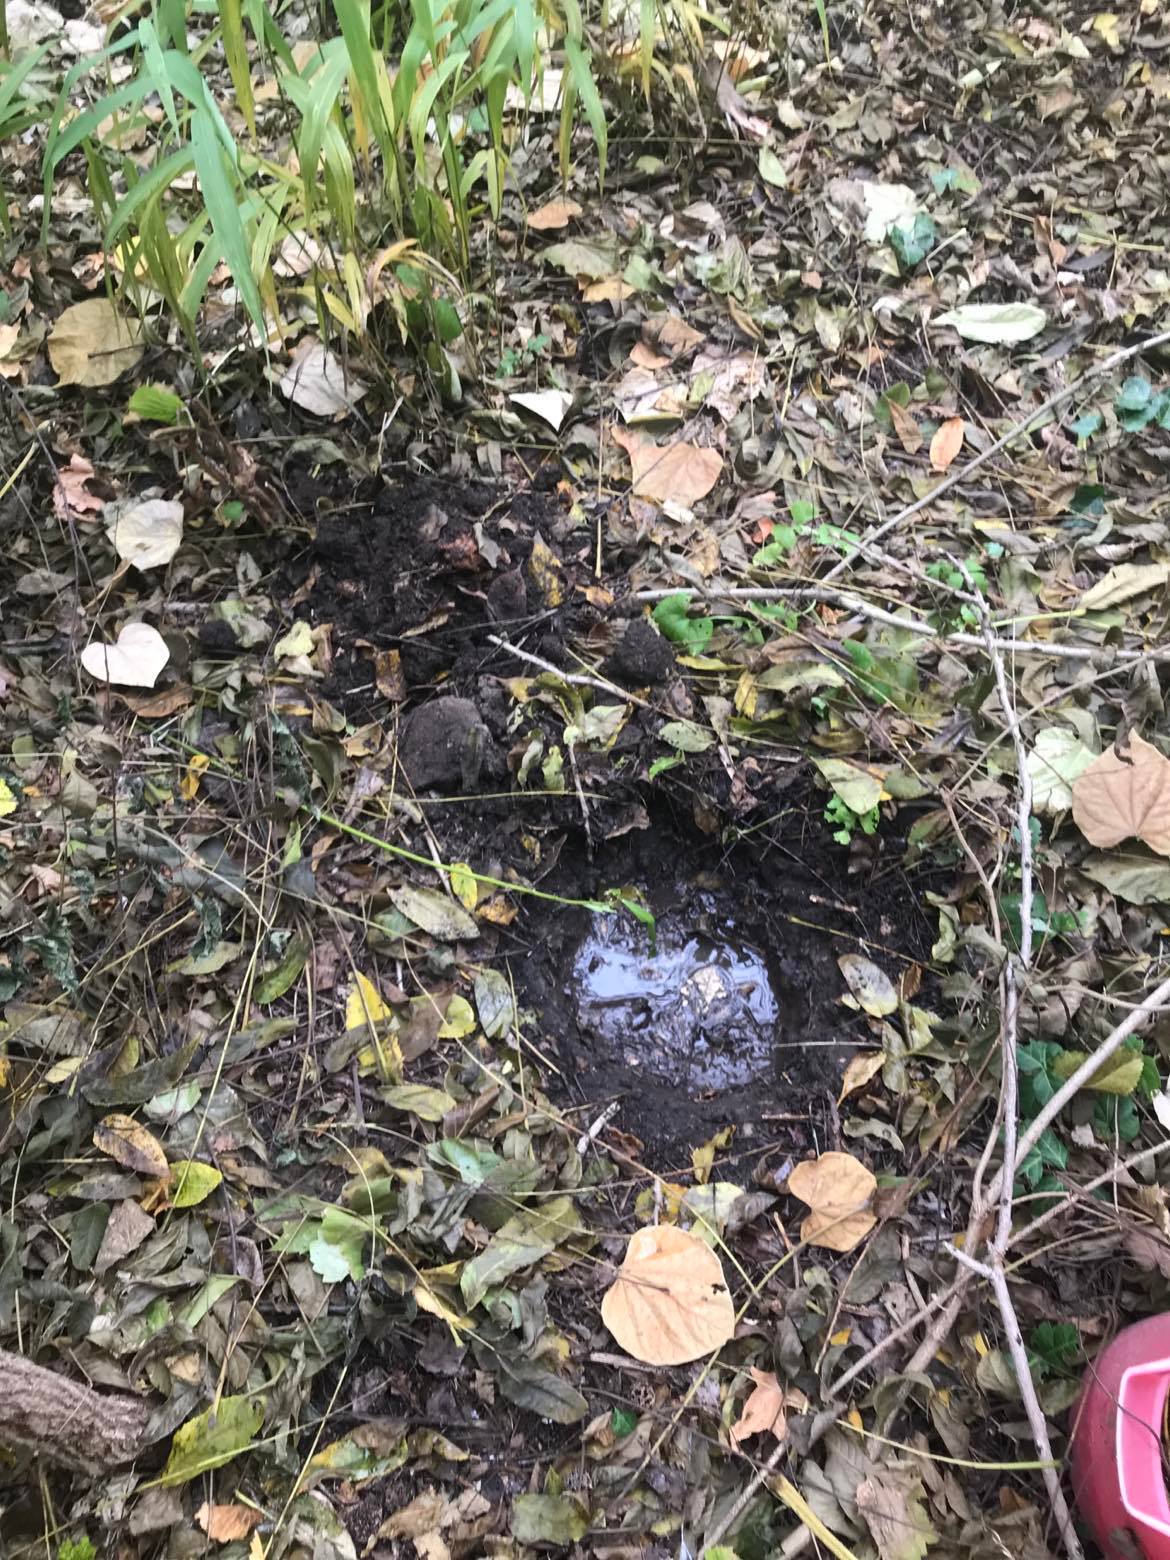 Freshly dug hole in the ground filled with water from the rain barrel. The hold is surrounded by brown leaf litter, and some unidentified herbaceous plants are growing nearby.